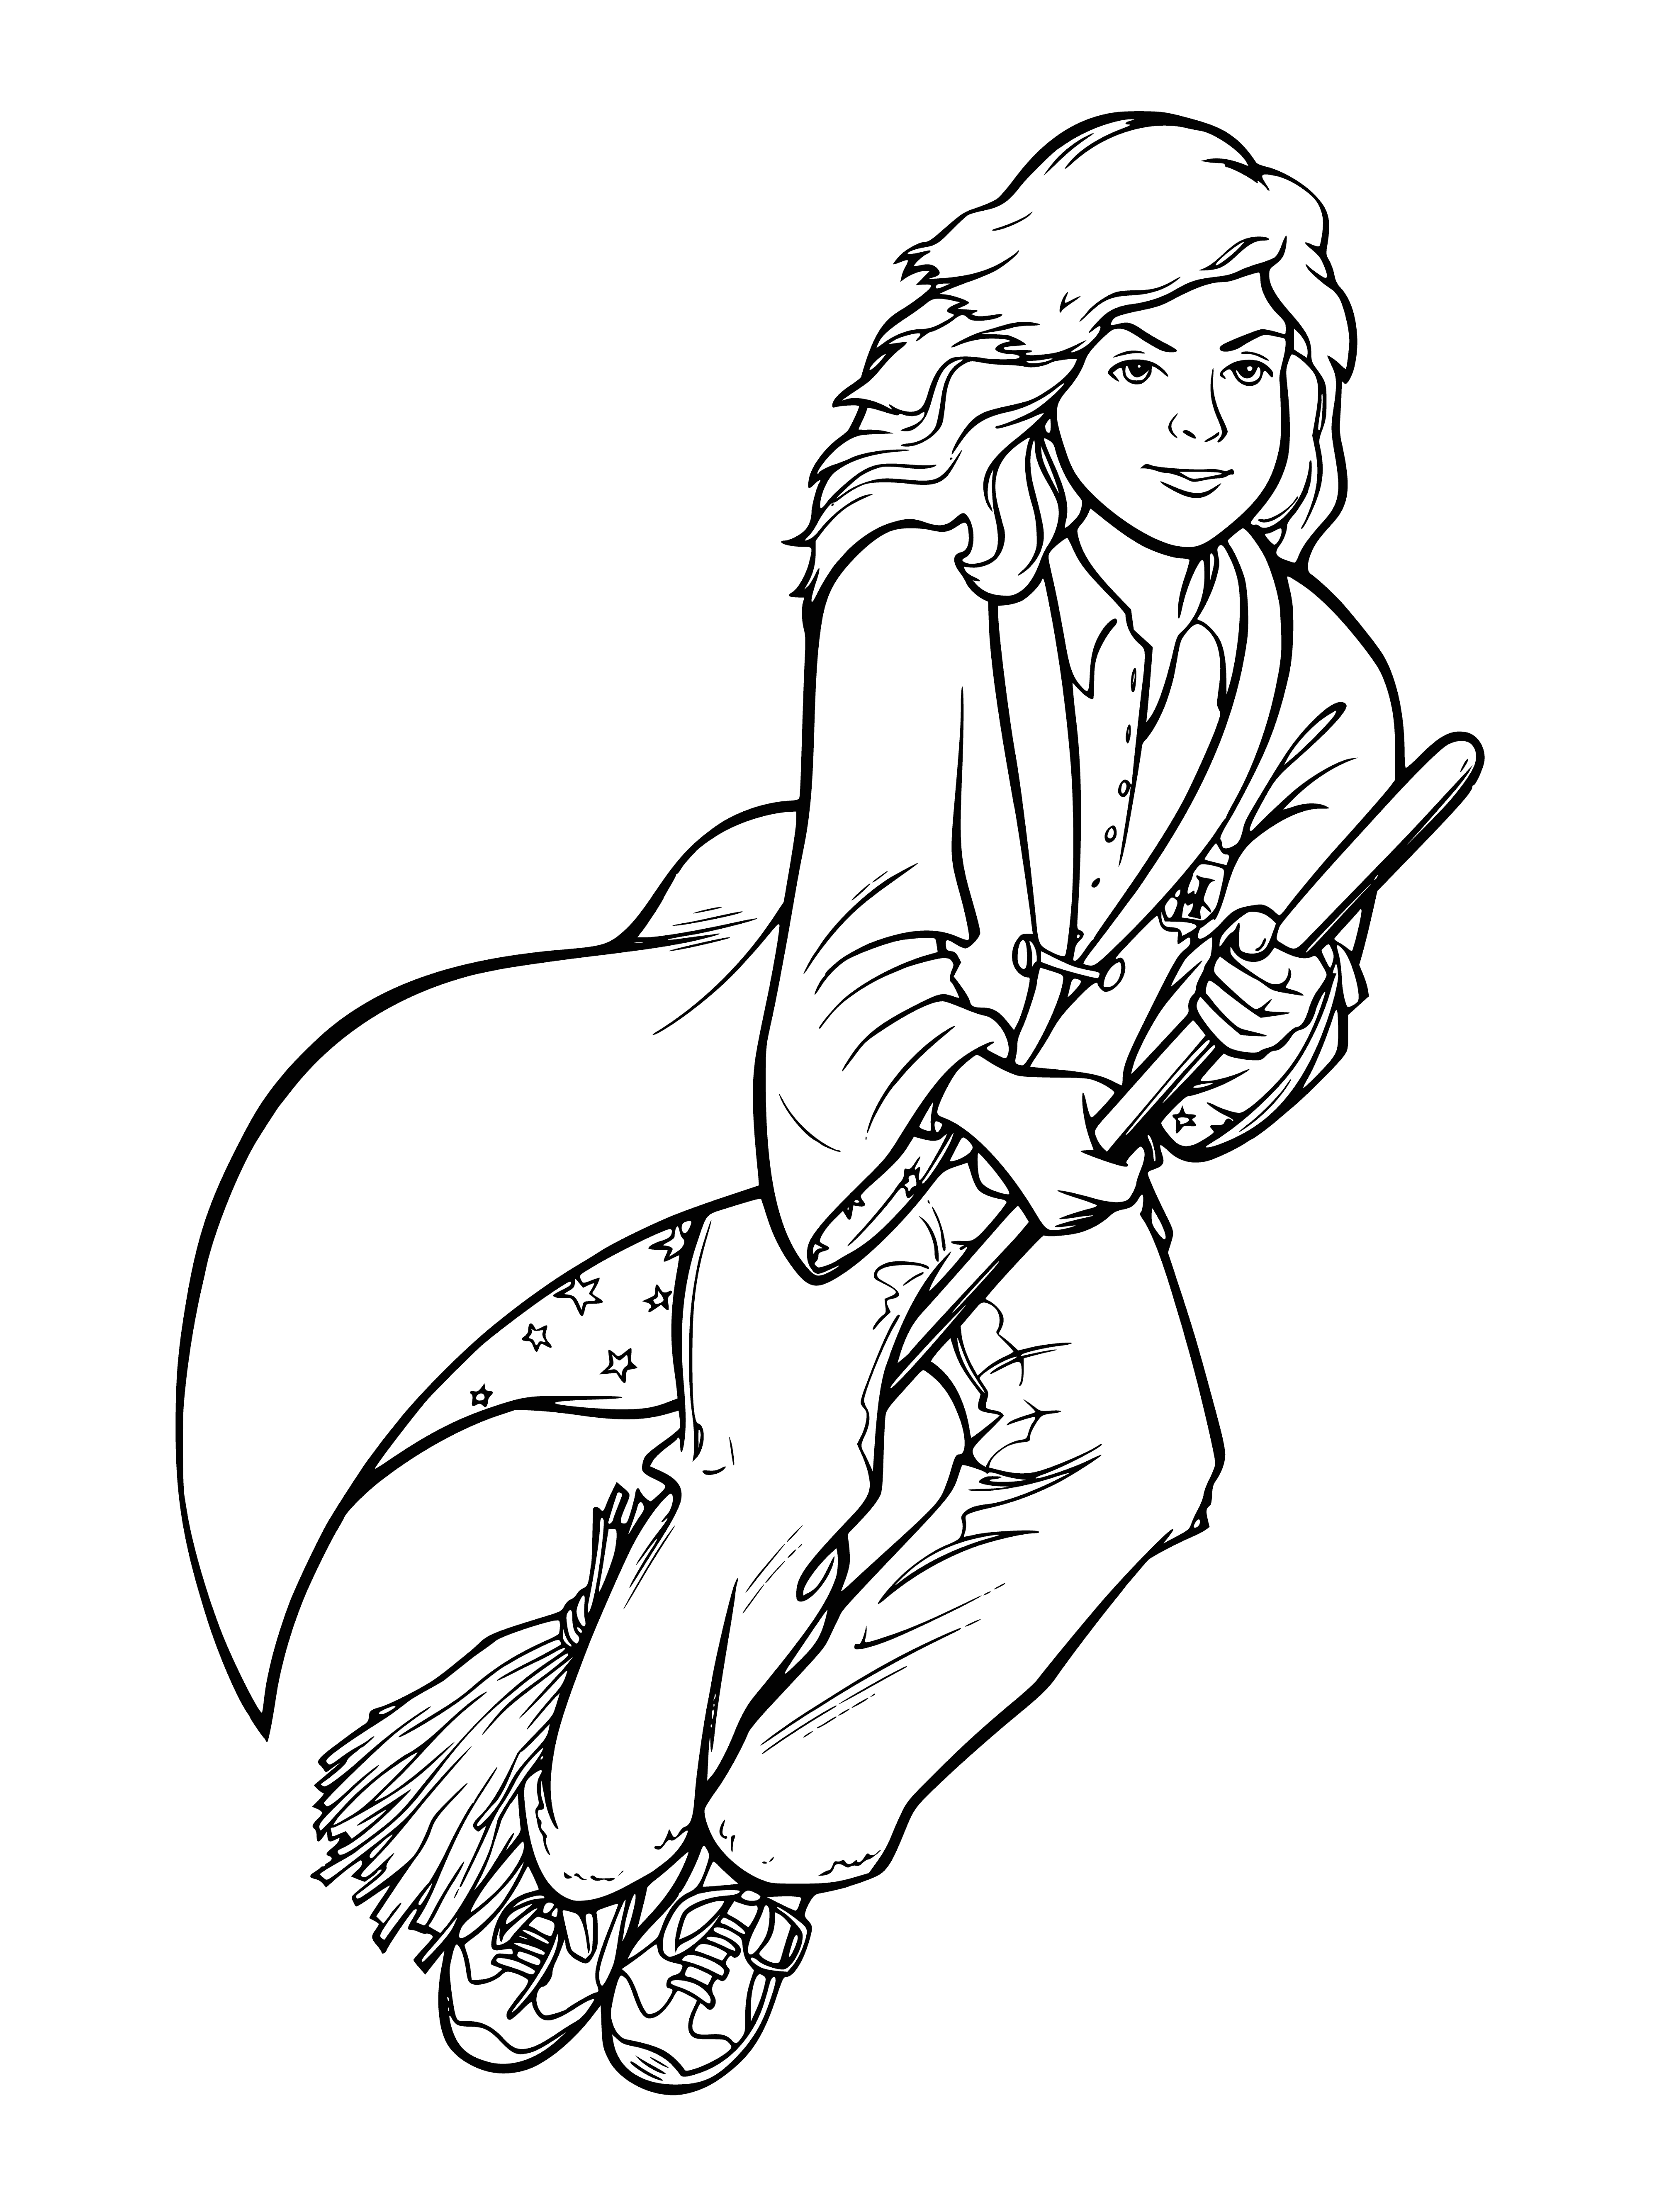 coloring page: Hermione, young witch ready to cast a spell in black robe, light brown hair & glasses, wand in hand.